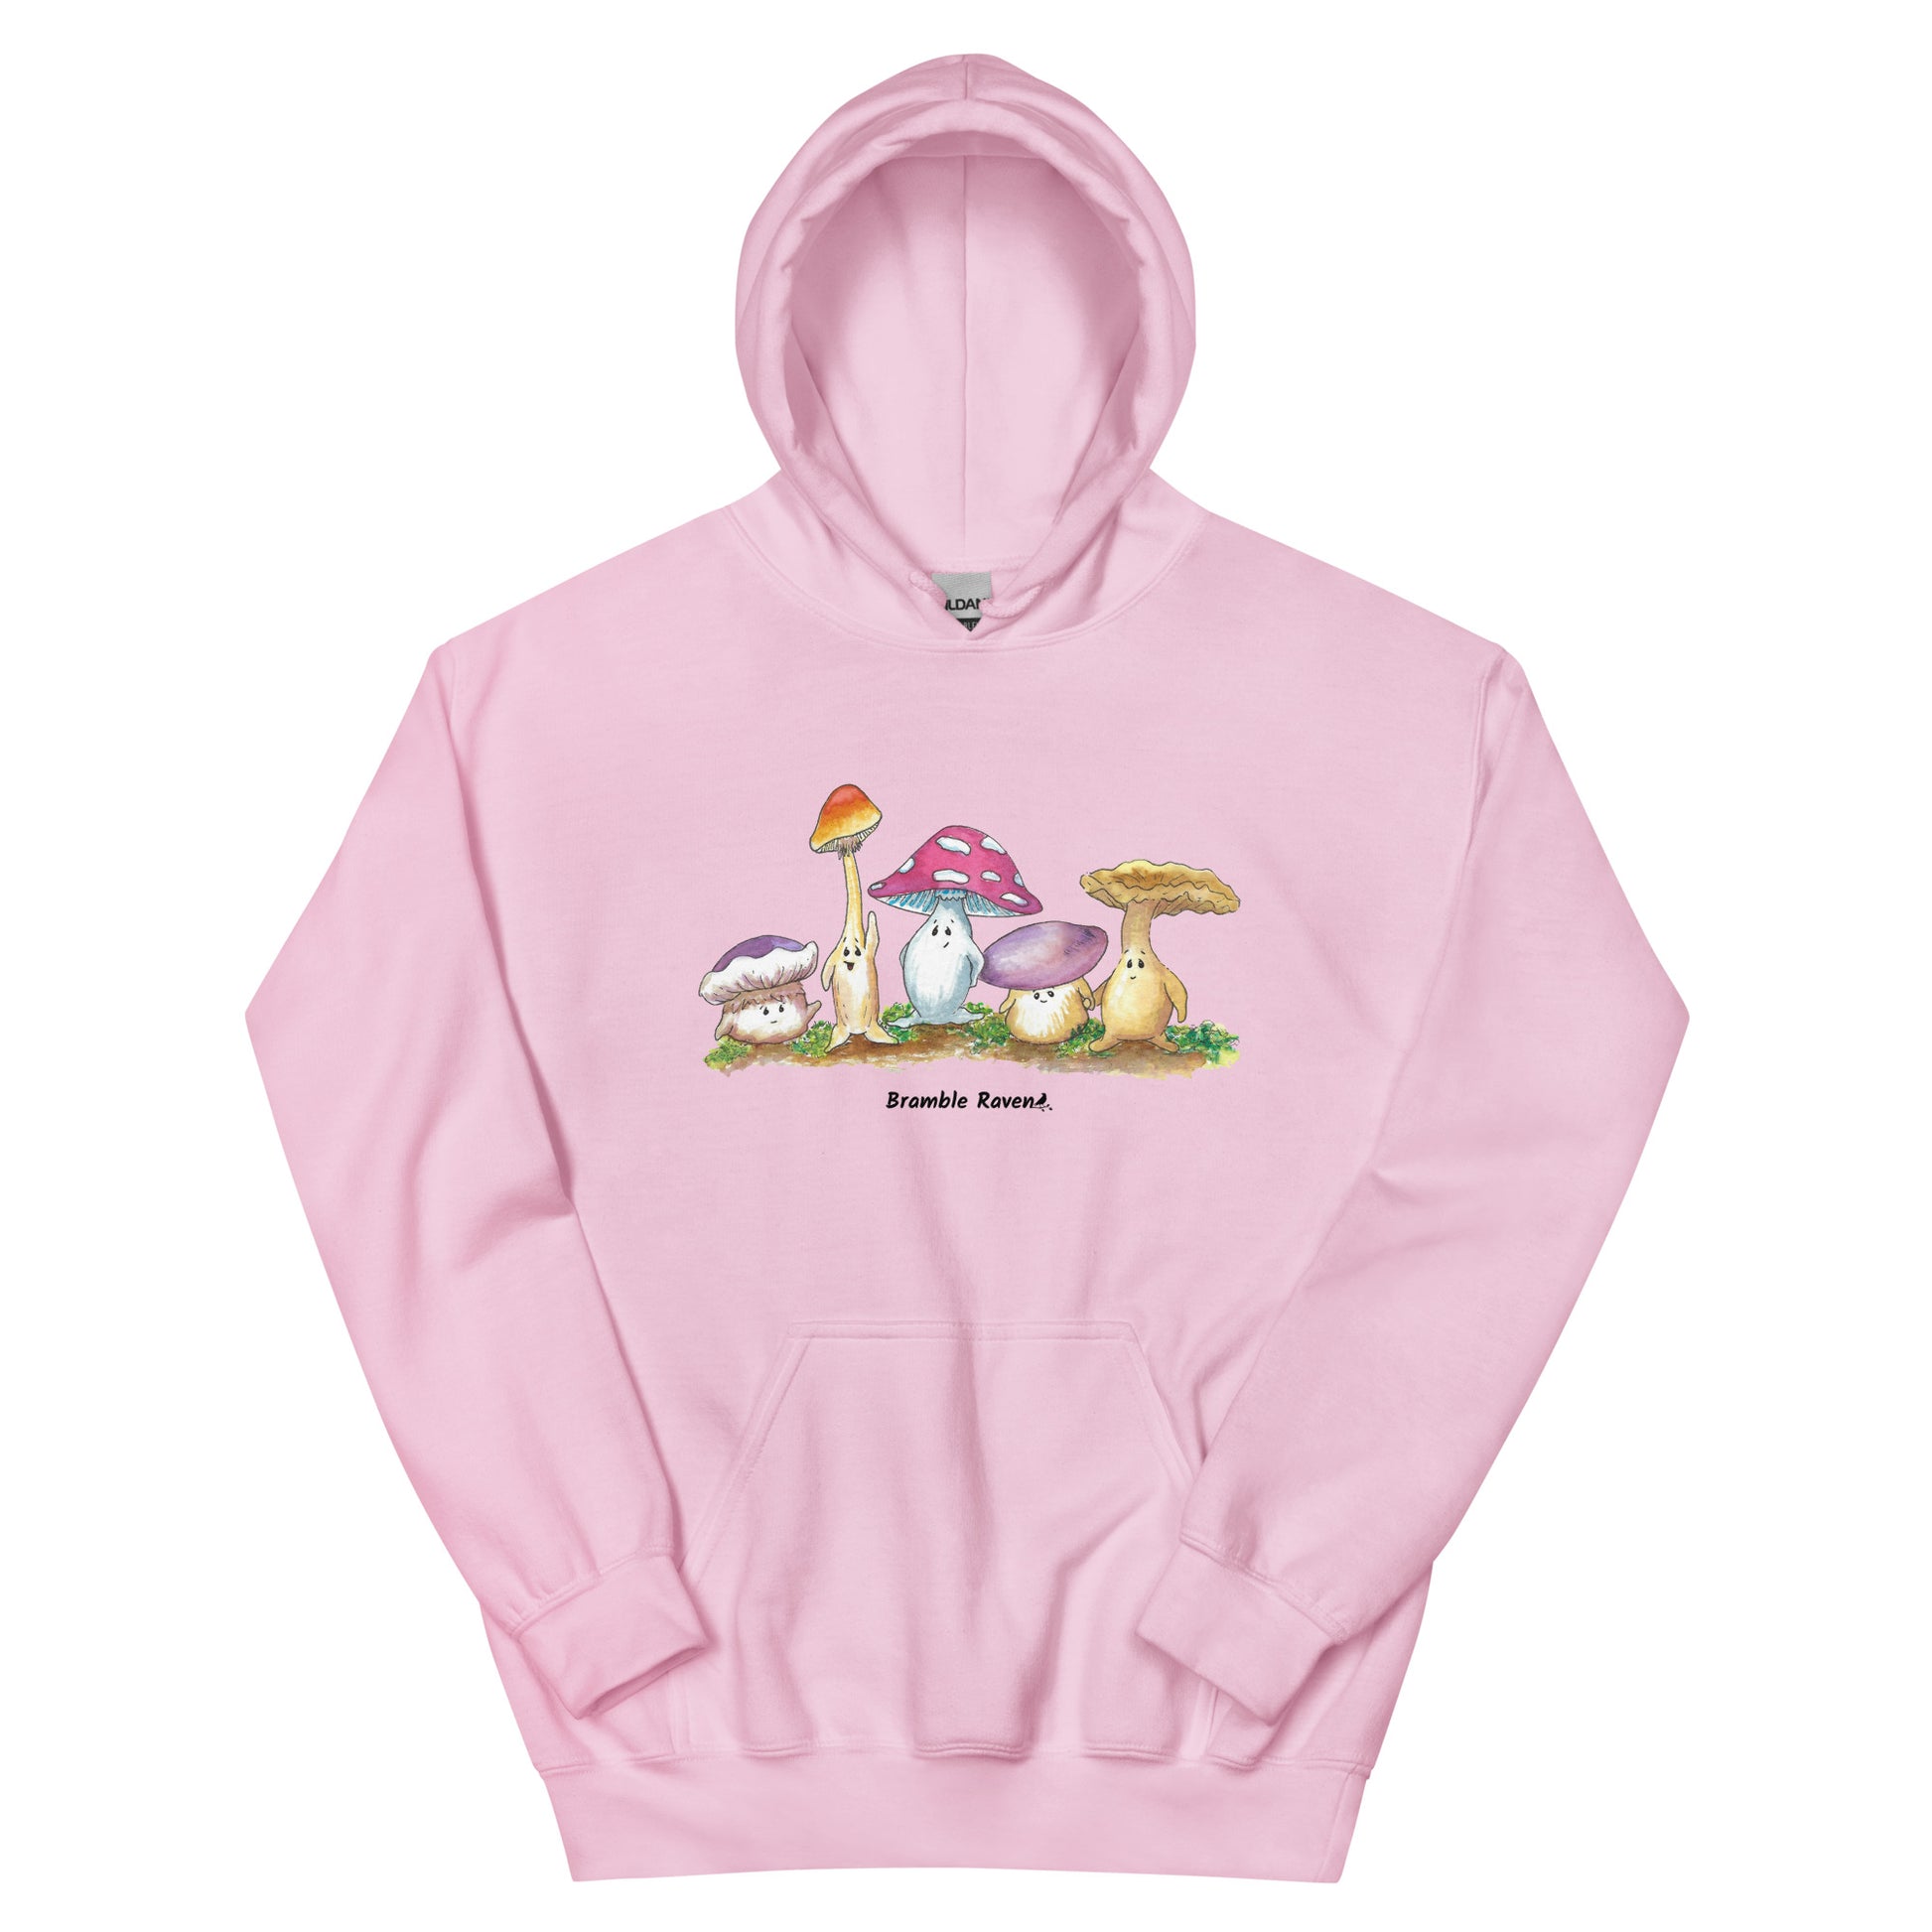 Light pink colored unisex cotton/polyester blend hoodie. Features front design of Mushy and his whimsical mushroom friends. Hoodie has double lined hood, front pouch pocket, rib knit cuffs and stretchy waistband.